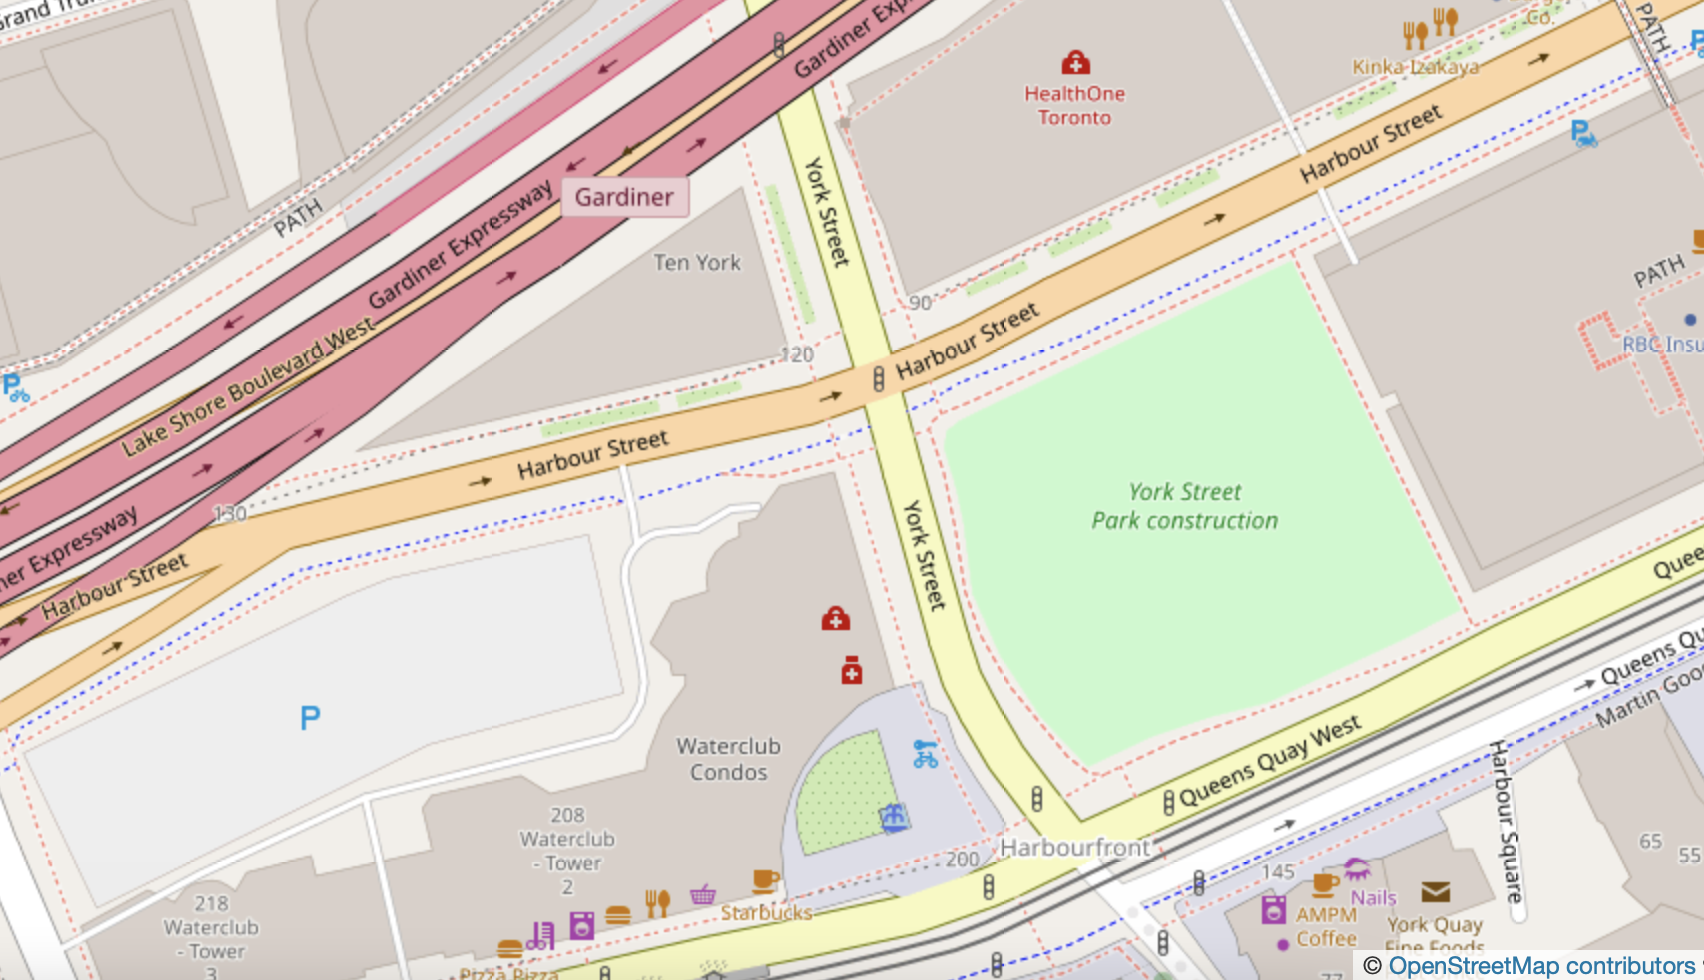 York Street and Harbour Street | © OpenStreetMap contributors (CC BY-SA 2.0)